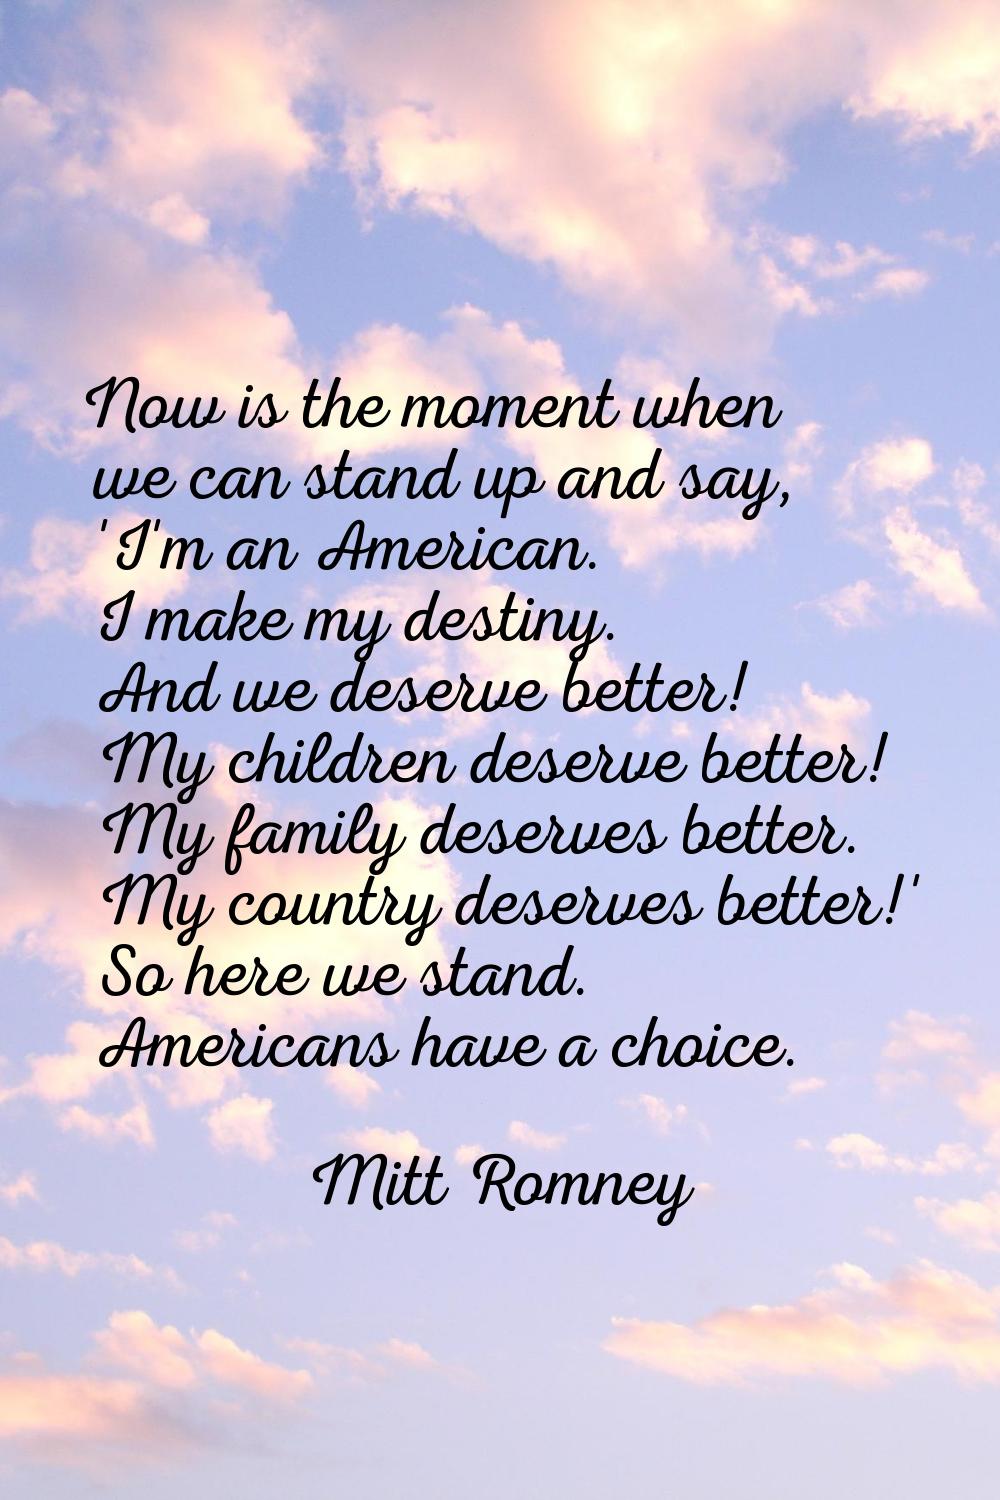 Now is the moment when we can stand up and say, 'I'm an American. I make my destiny. And we deserve